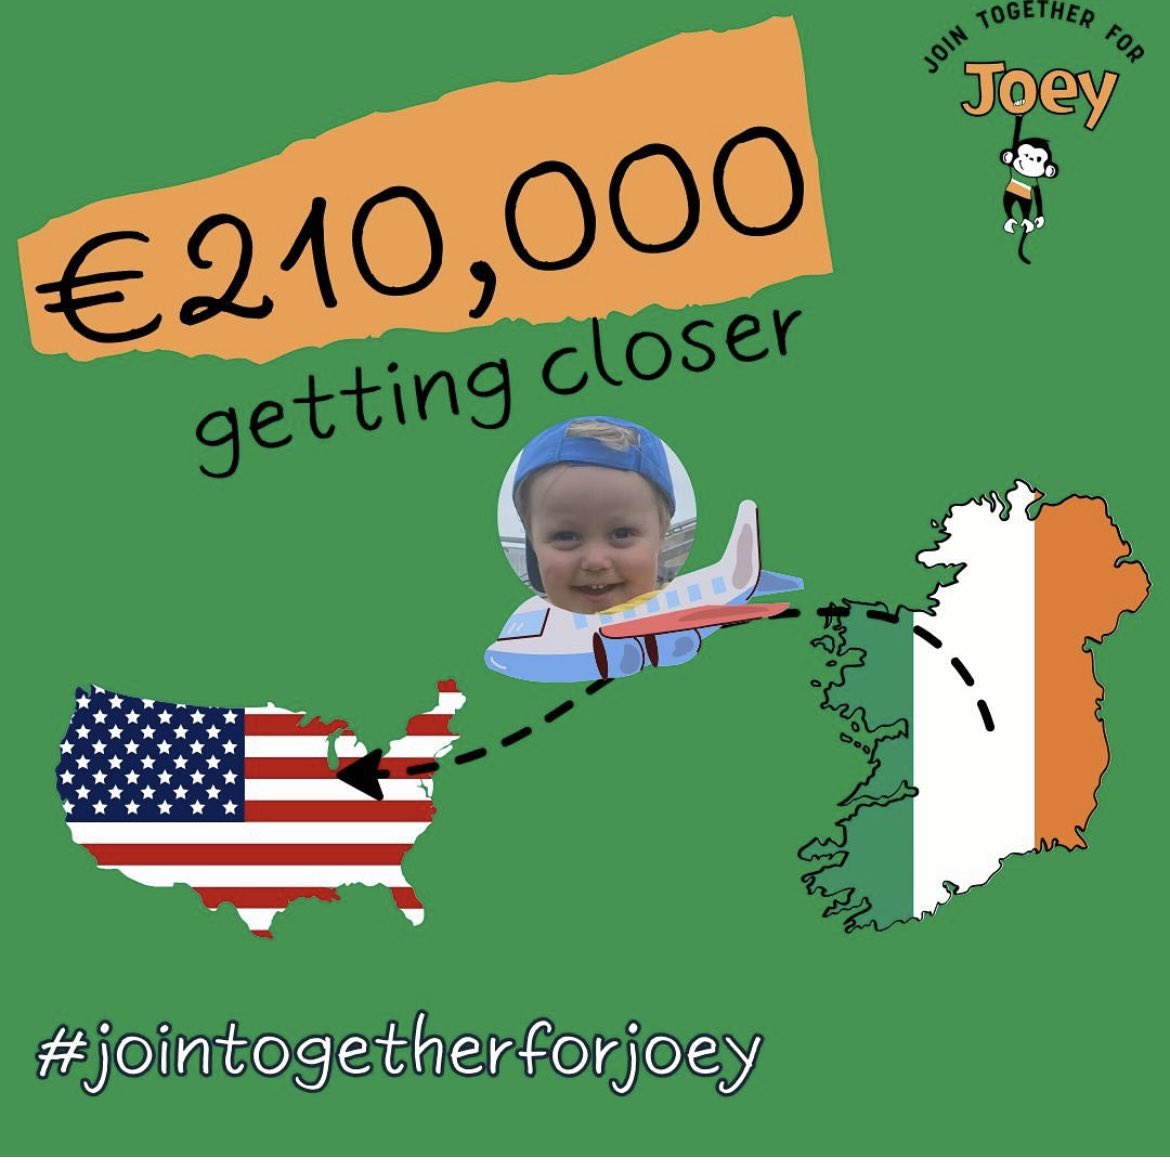 Thank you all so much we are completely blown away by your generosity & support from near & far. Let’s get Joey to Chicago. 🙏💚🤍💛 *link in the bio #jointogetherforJoey